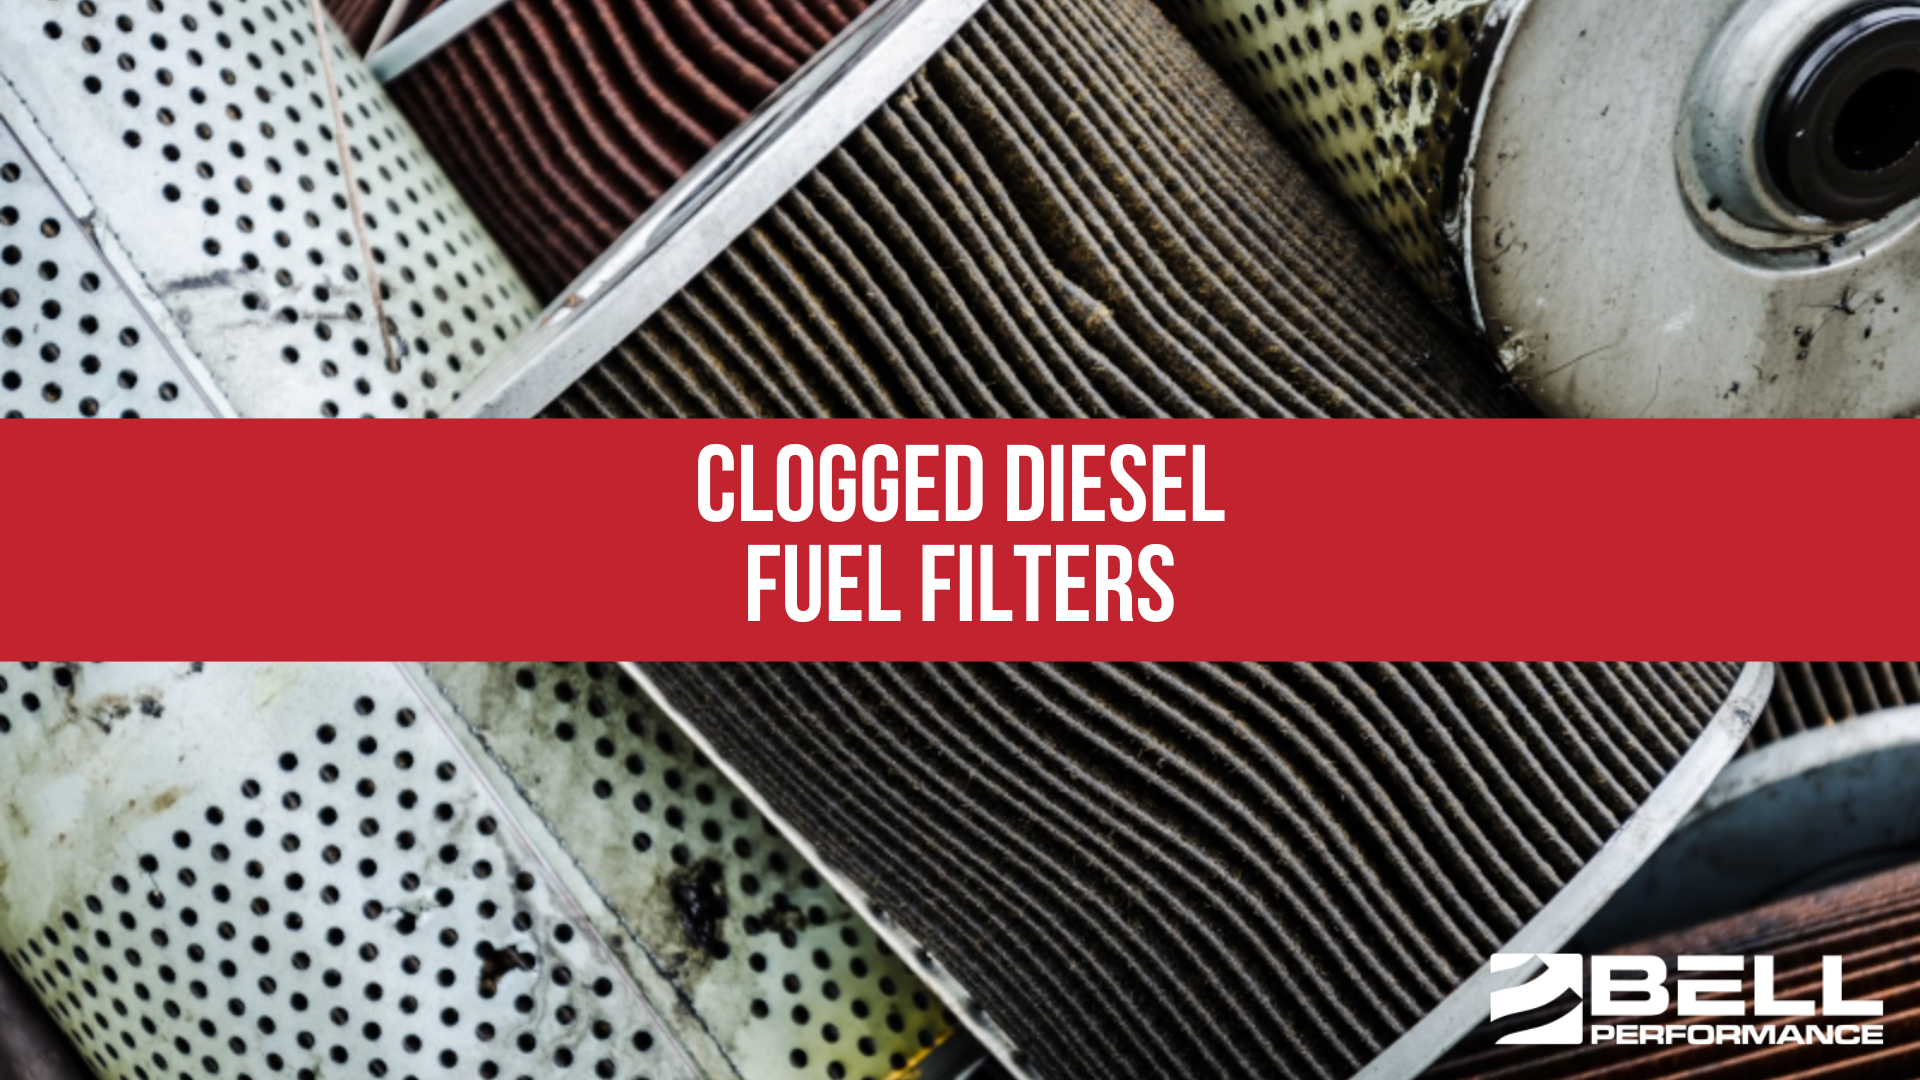 Clogged Diesel Fuel Filters